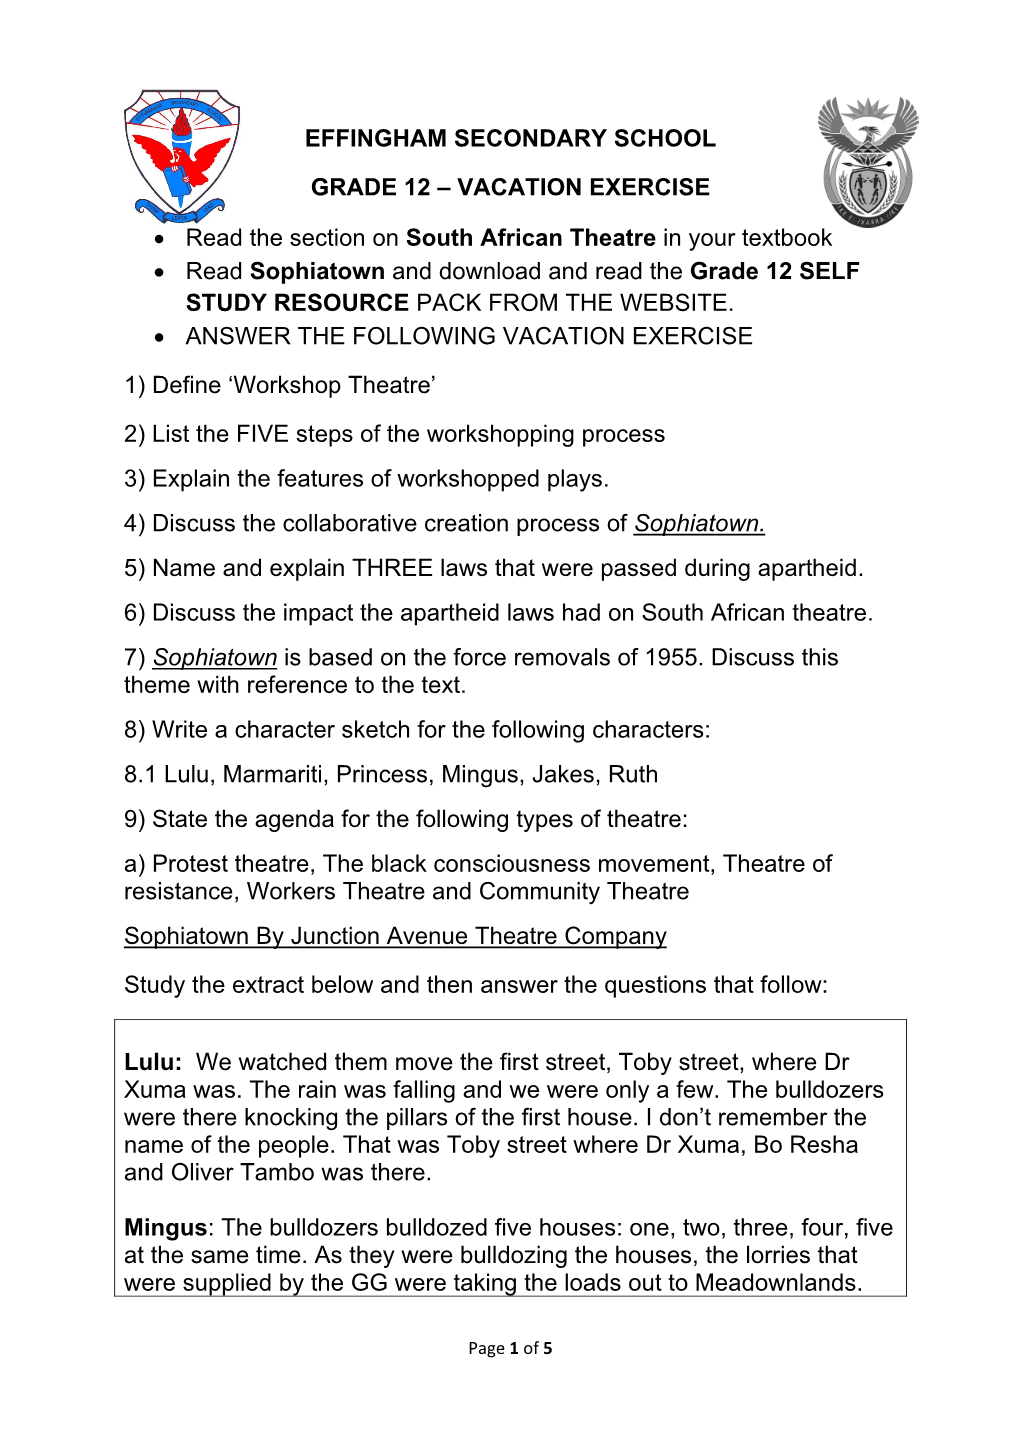 VACATION EXERCISE • Read the Section on South African Theatre in Your Textbook